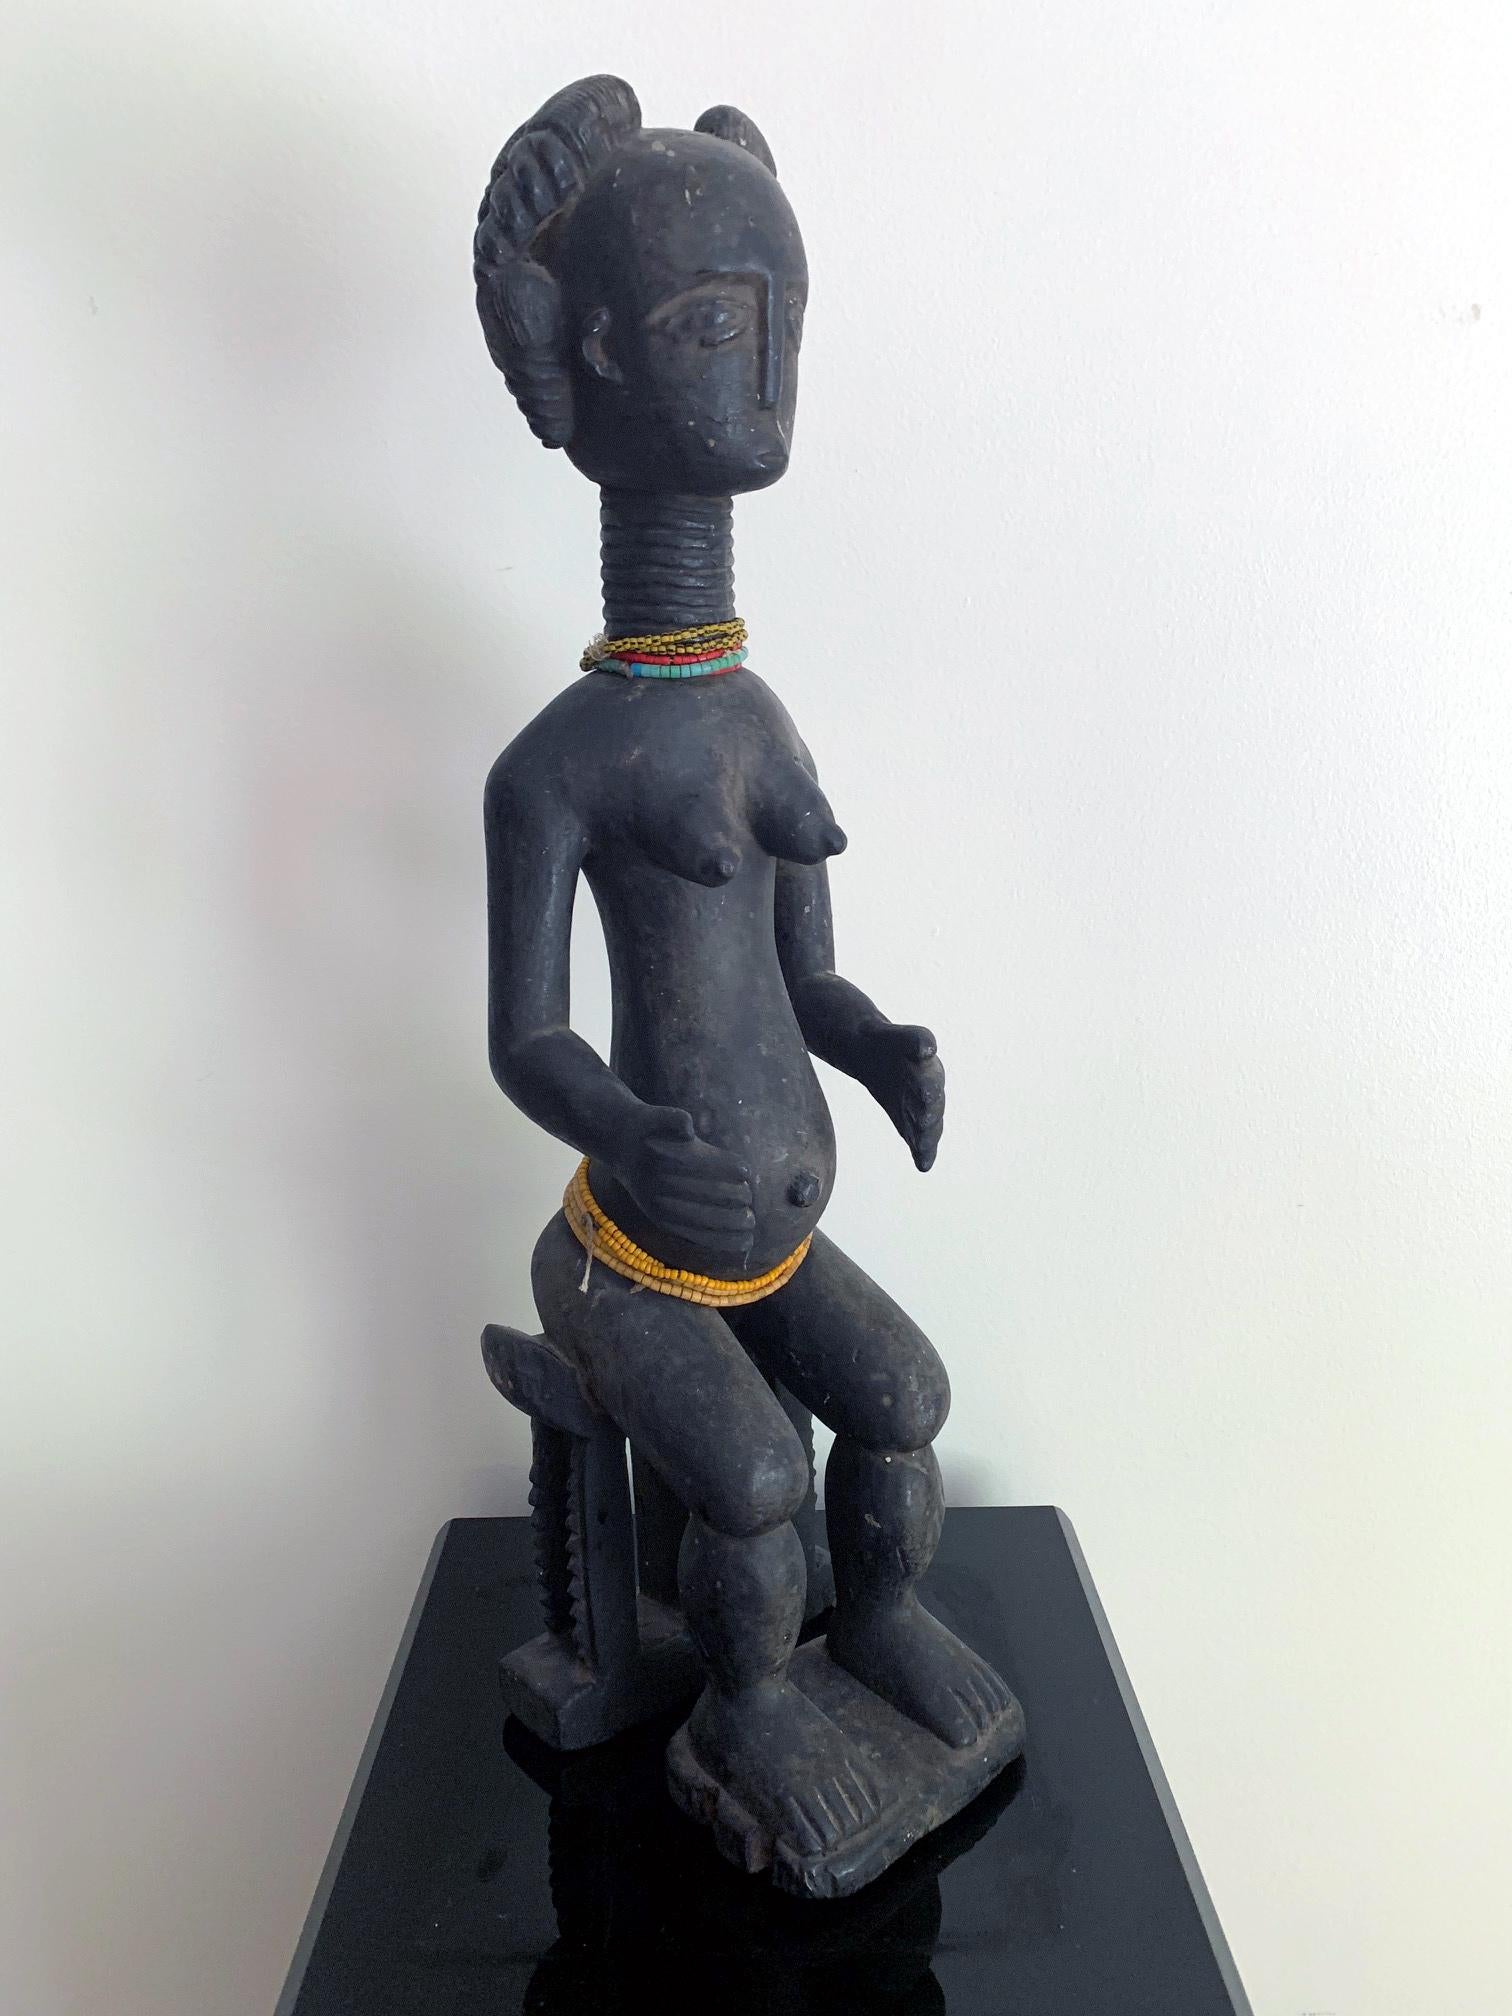 On offer is an Ashanti female fertility figure from Ghana, West Africa, circa Mid-20th century. Carved from a single block of wood, the statue depicts a female with typical coiffure and facial expression on seated on an Akan bench. Her arms